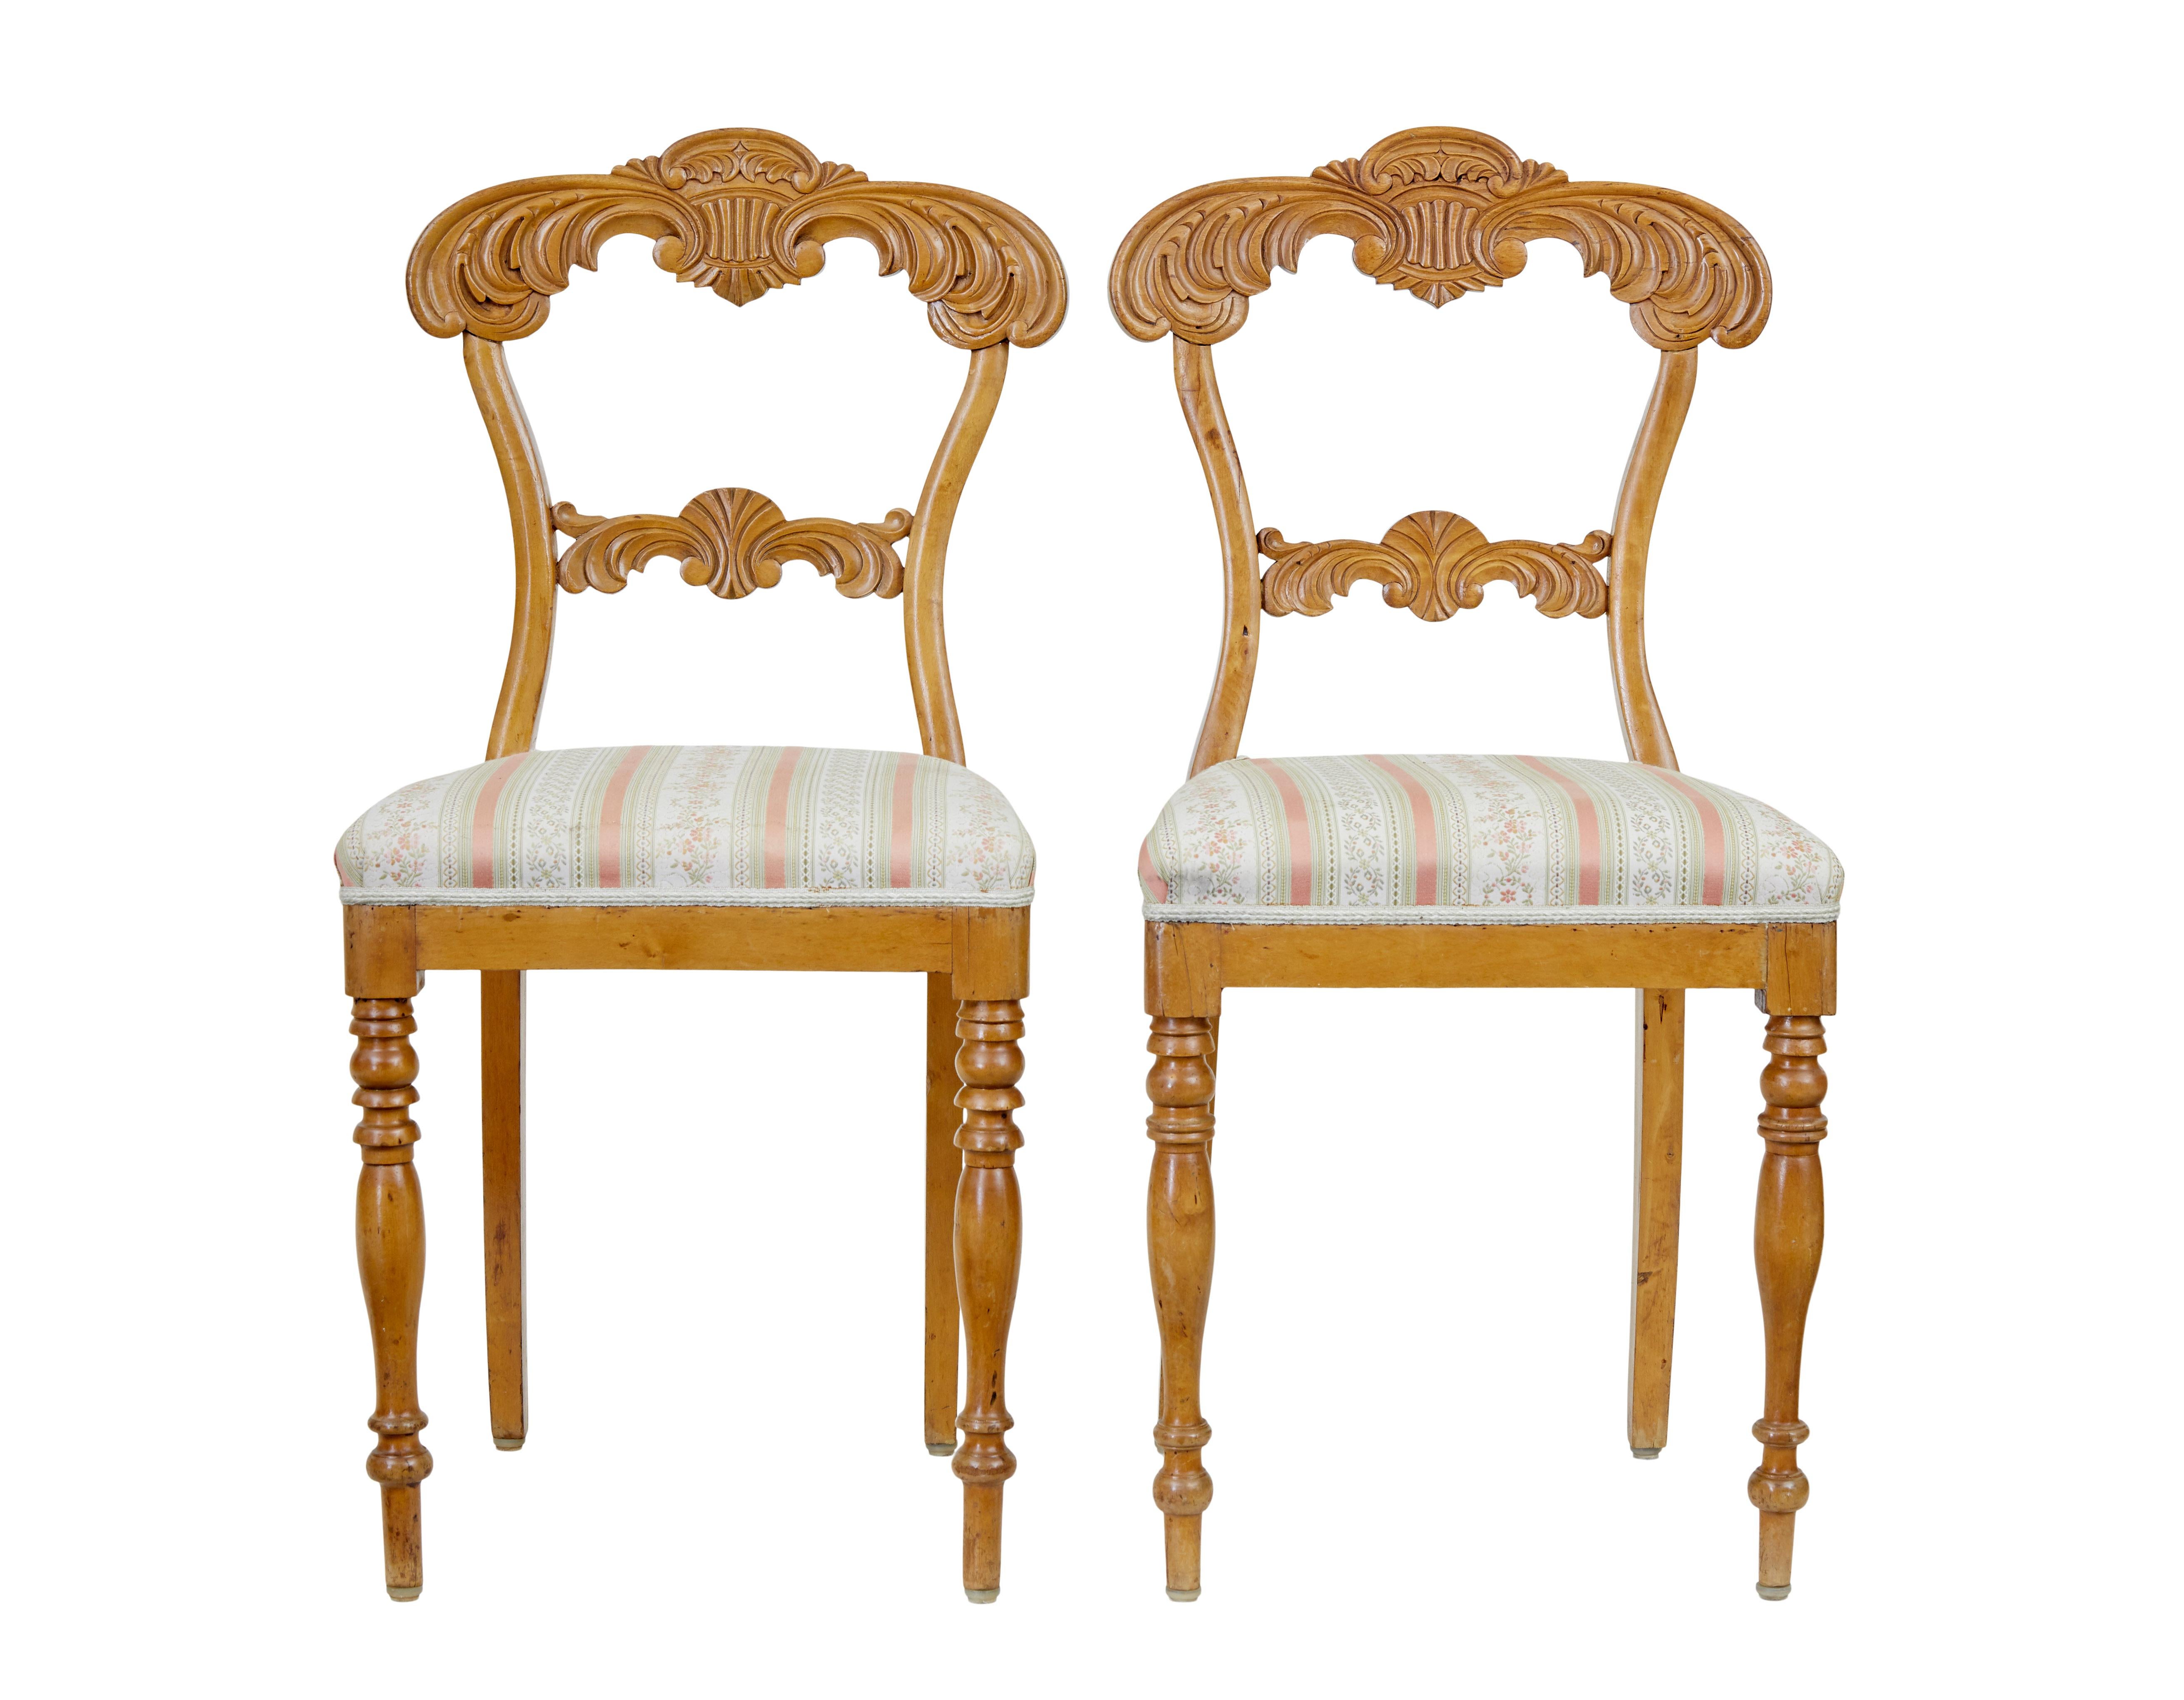 Pair of carved Swedish birch occasional chairs circa 1920,

Heavily carved back rest with scrolls and acanthus leaves. Standing on turned front legs.

Very minor marks to upholstery and restorations to woodwork.

Seat height: 19